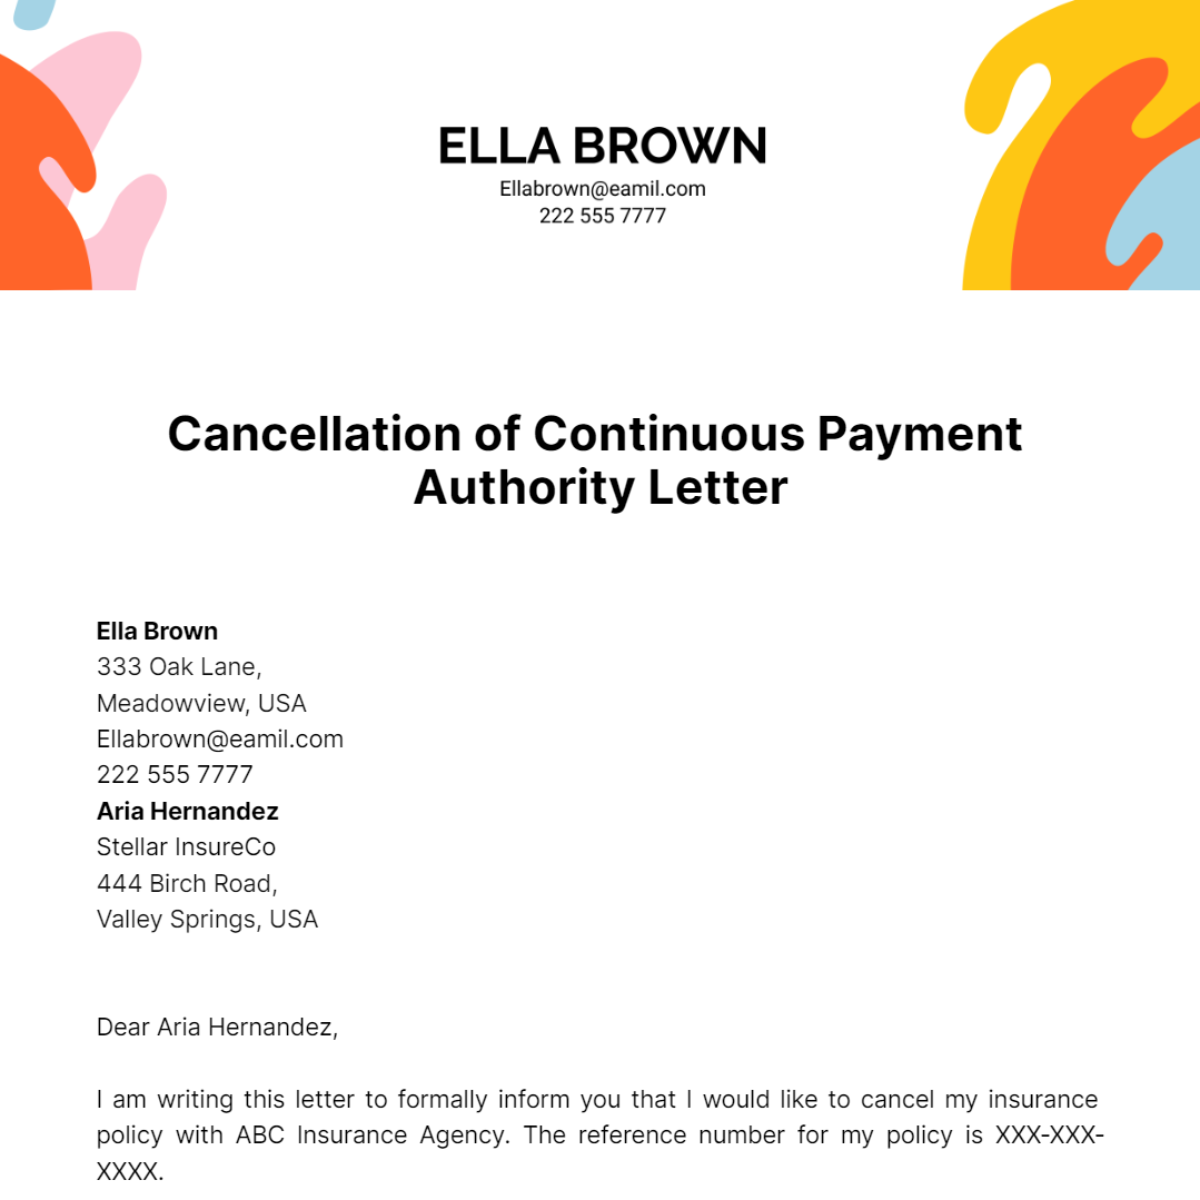 Cancellation of Continuous Payment Authority Letter Template